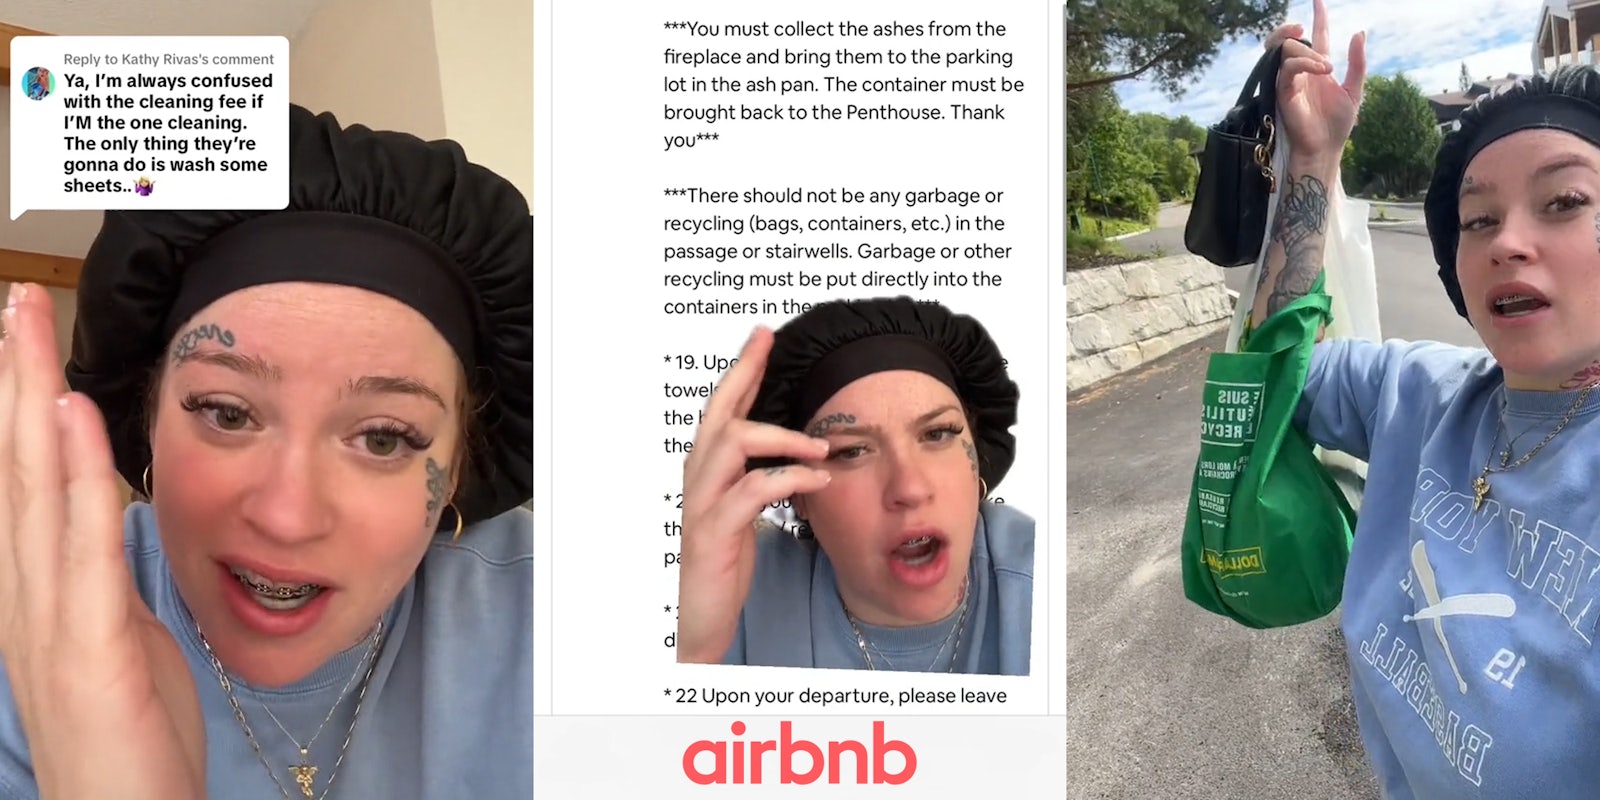 Airbnb guest speaking with caption 'Ya, I'm always confused with the cleaning fee if I'm the one cleaning... (l) Airbnb guest greenscreen TikTok over email from Airbnb owner with Airbnb logo at the bottom (c) Airbnb guest taking out trash (r)